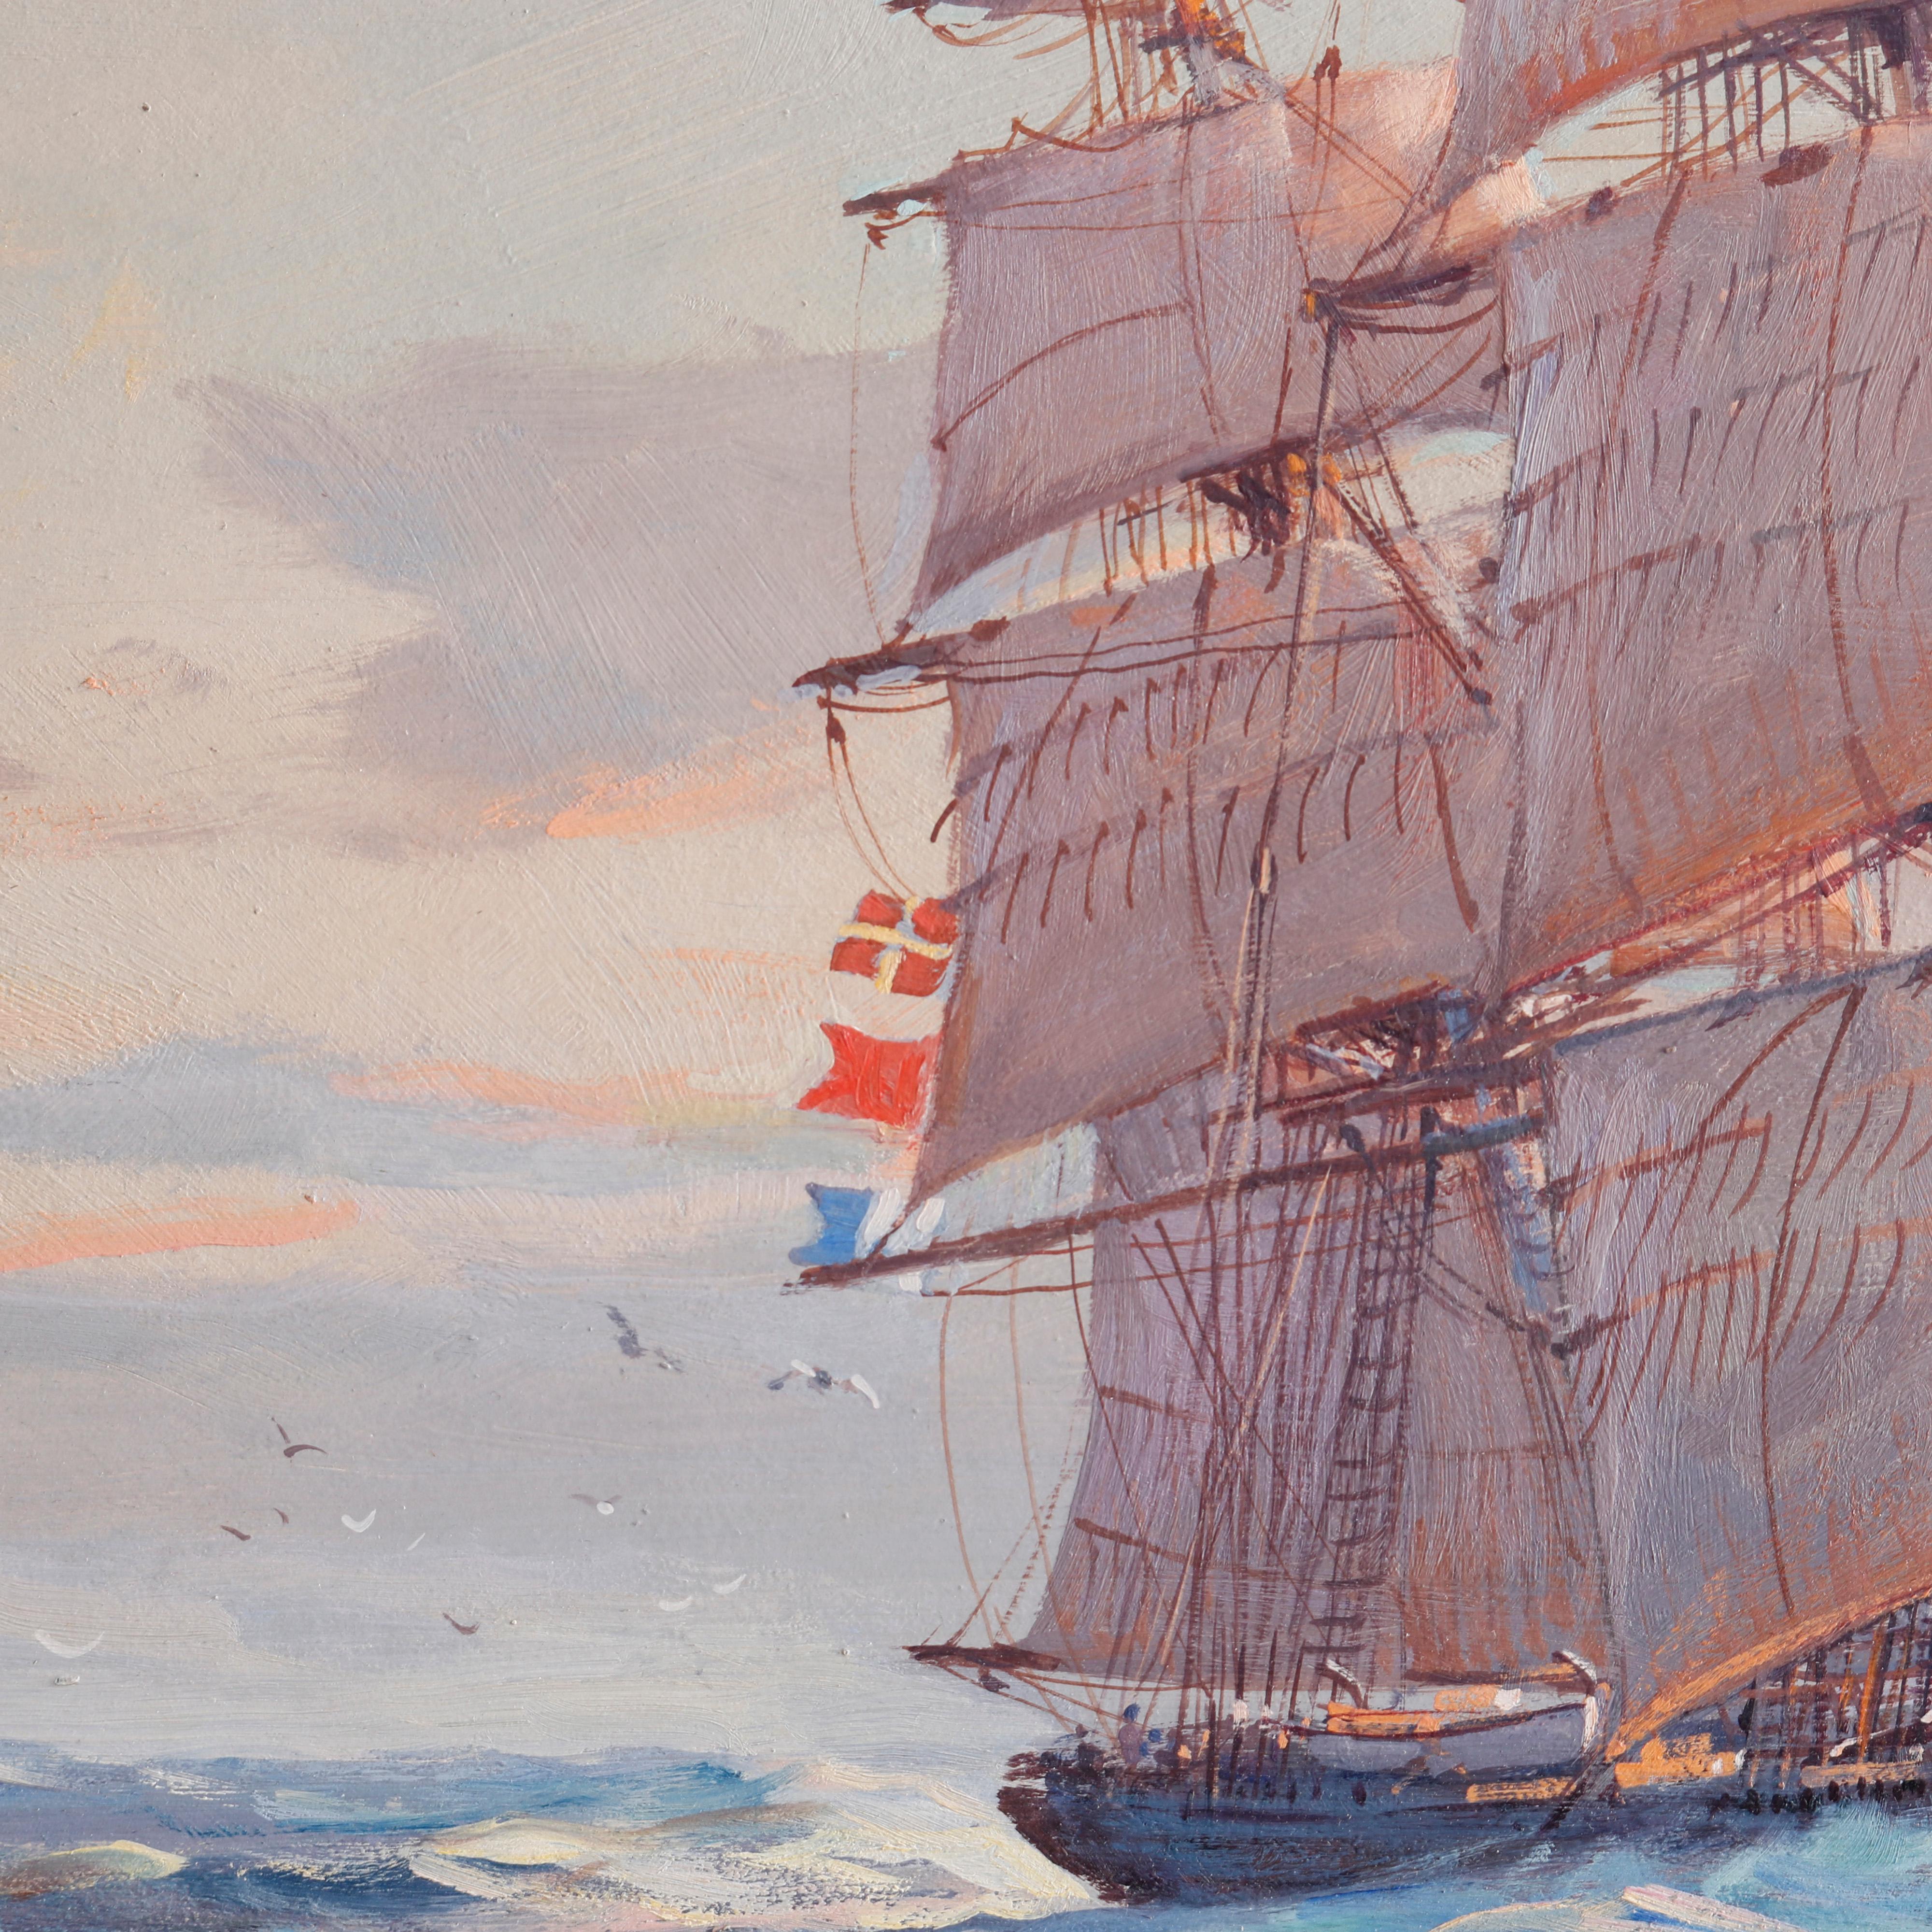 North American Maritime Oil Painting of Tall Mast Ship “Stag Hound” by Frank Vining Smith c1940